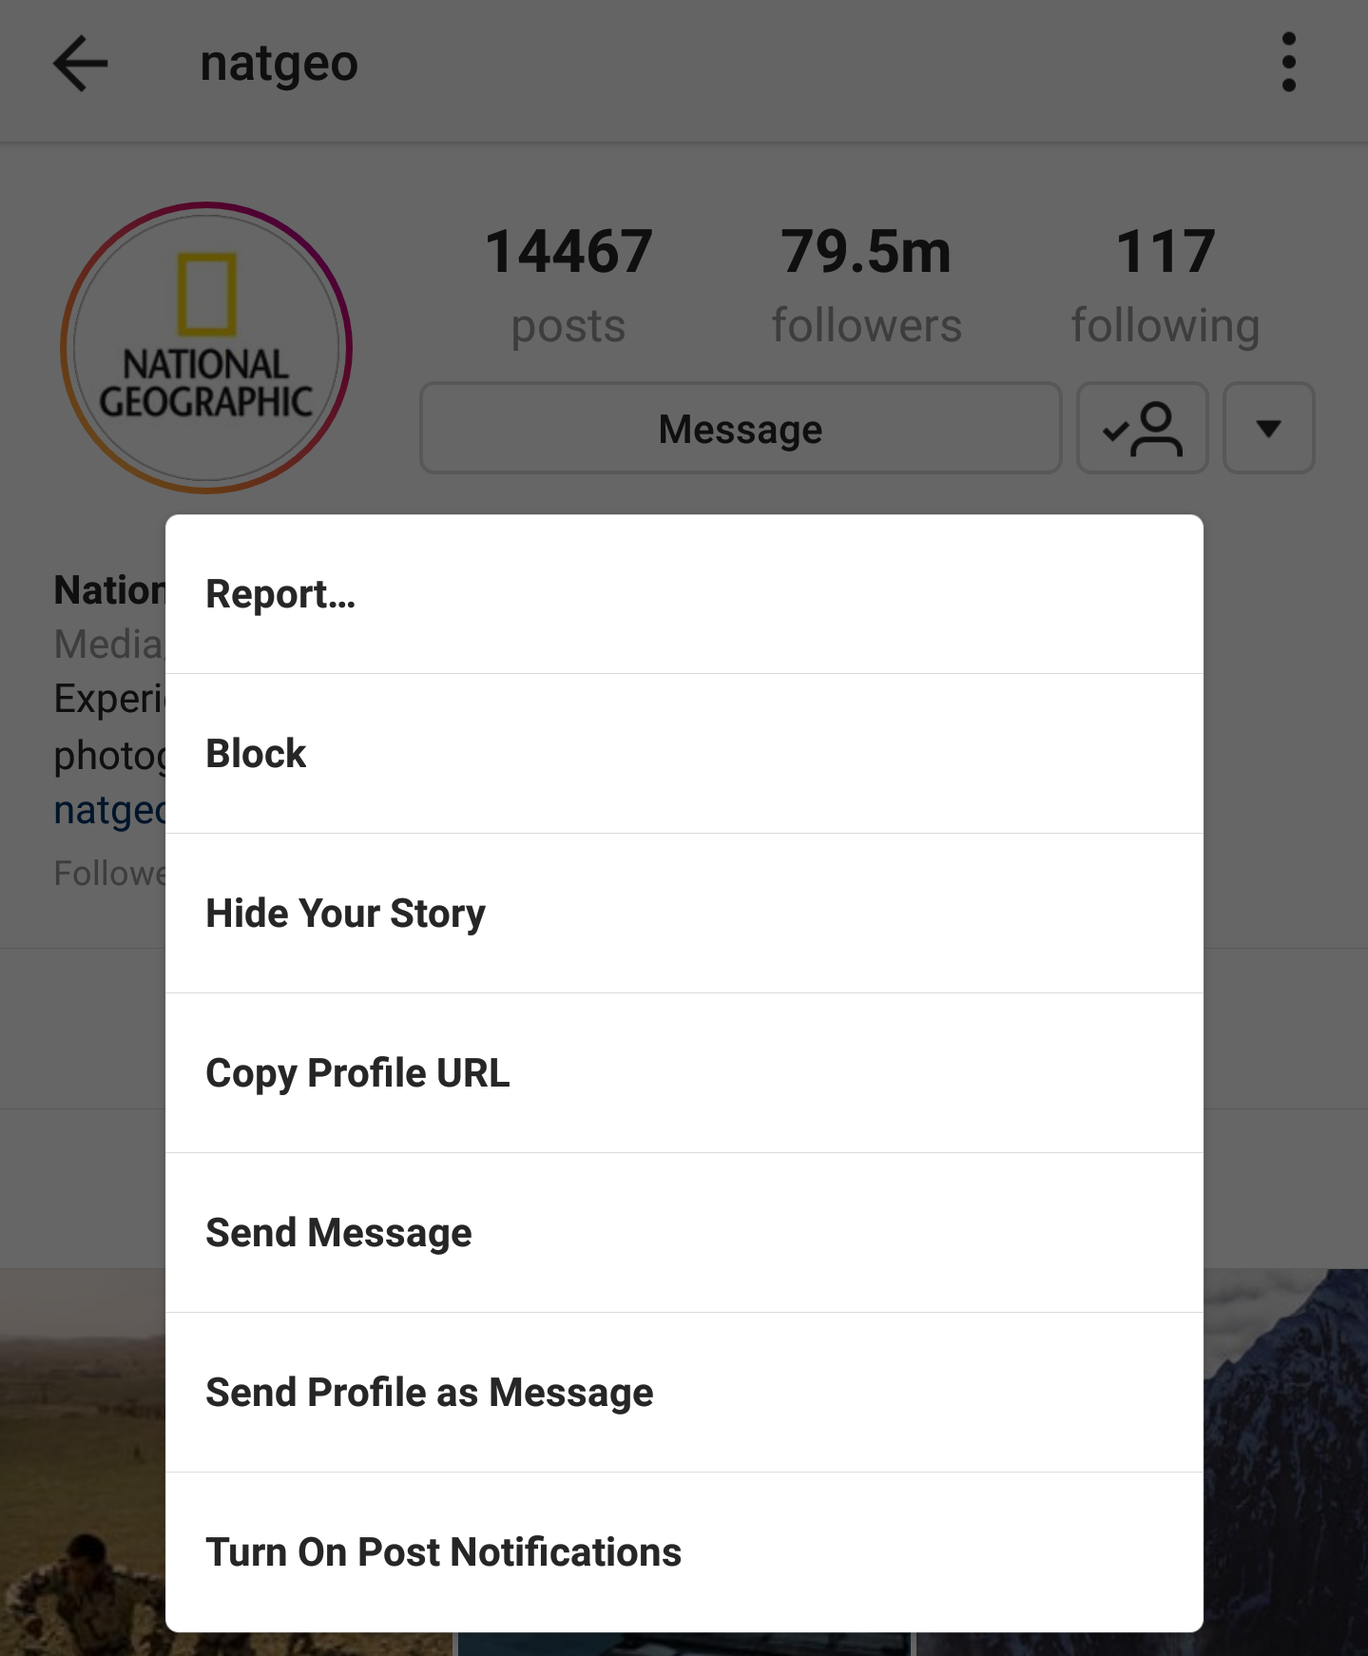 Instagram controversially ditched its reverse-chronological order feed for a new order determined by an algorithm, making it easy to completely miss some posts. To make sure you never miss a certain somebody’s updates, you can set up notification for them by visiting their profile, tapping the three dots in the top right-hand corner and selecting Turn On Post Notifications.